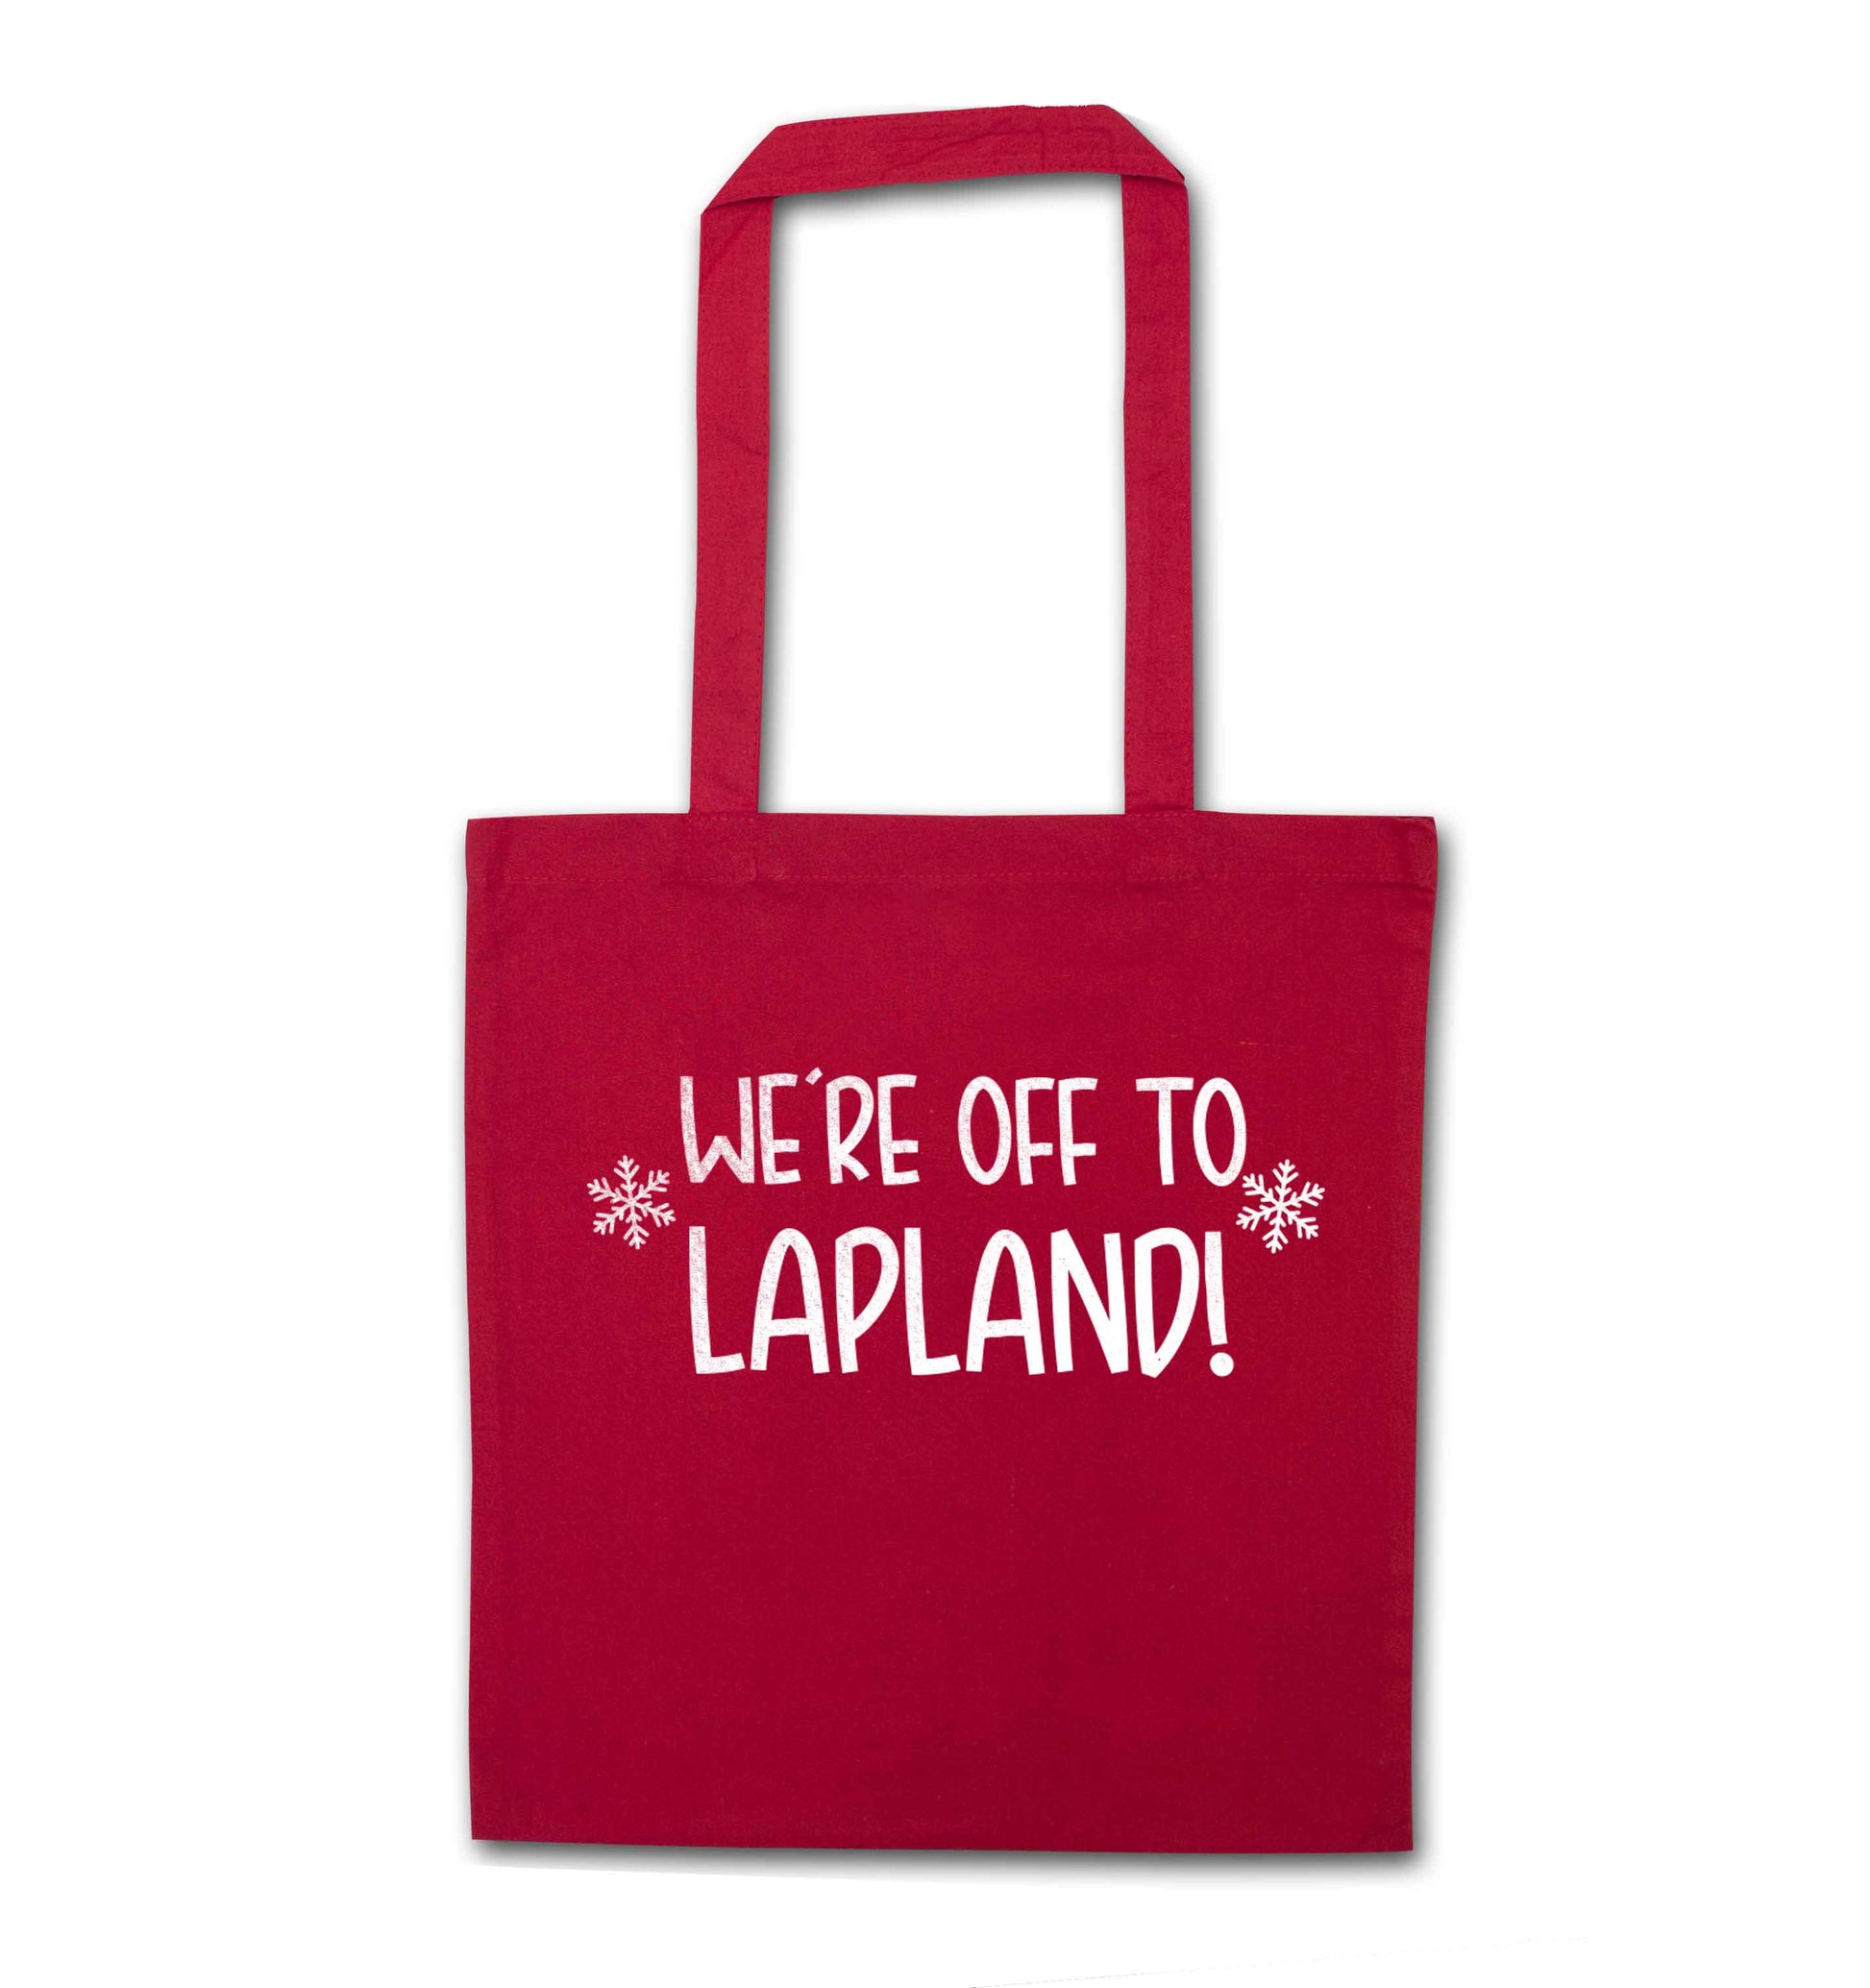 We're off to Lapland red tote bag